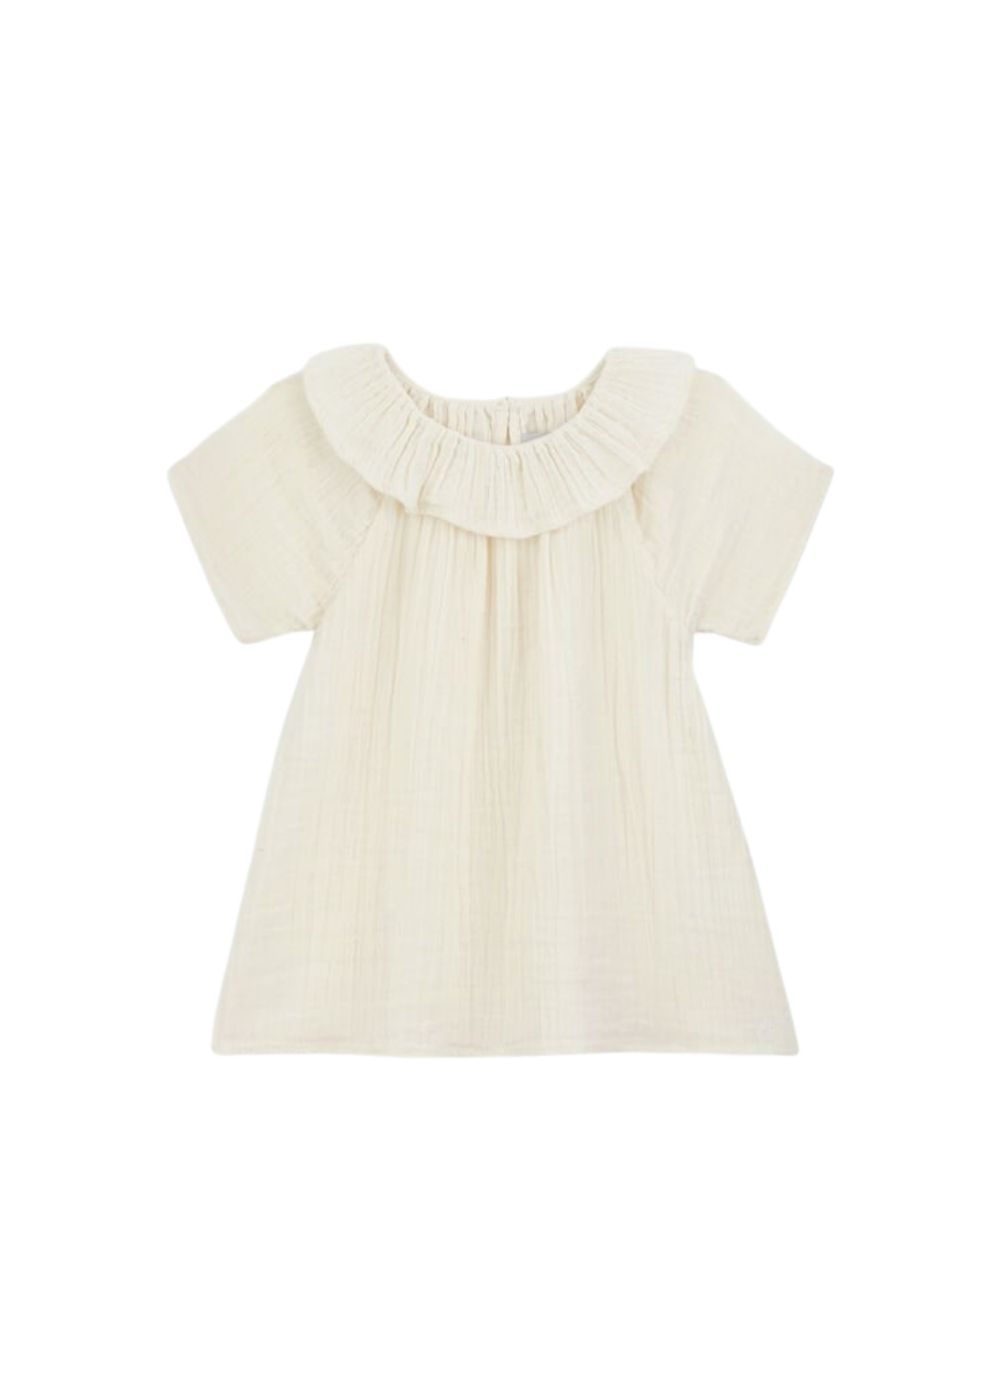 Featured image for “Petit Bateau Blusa In Cotone”